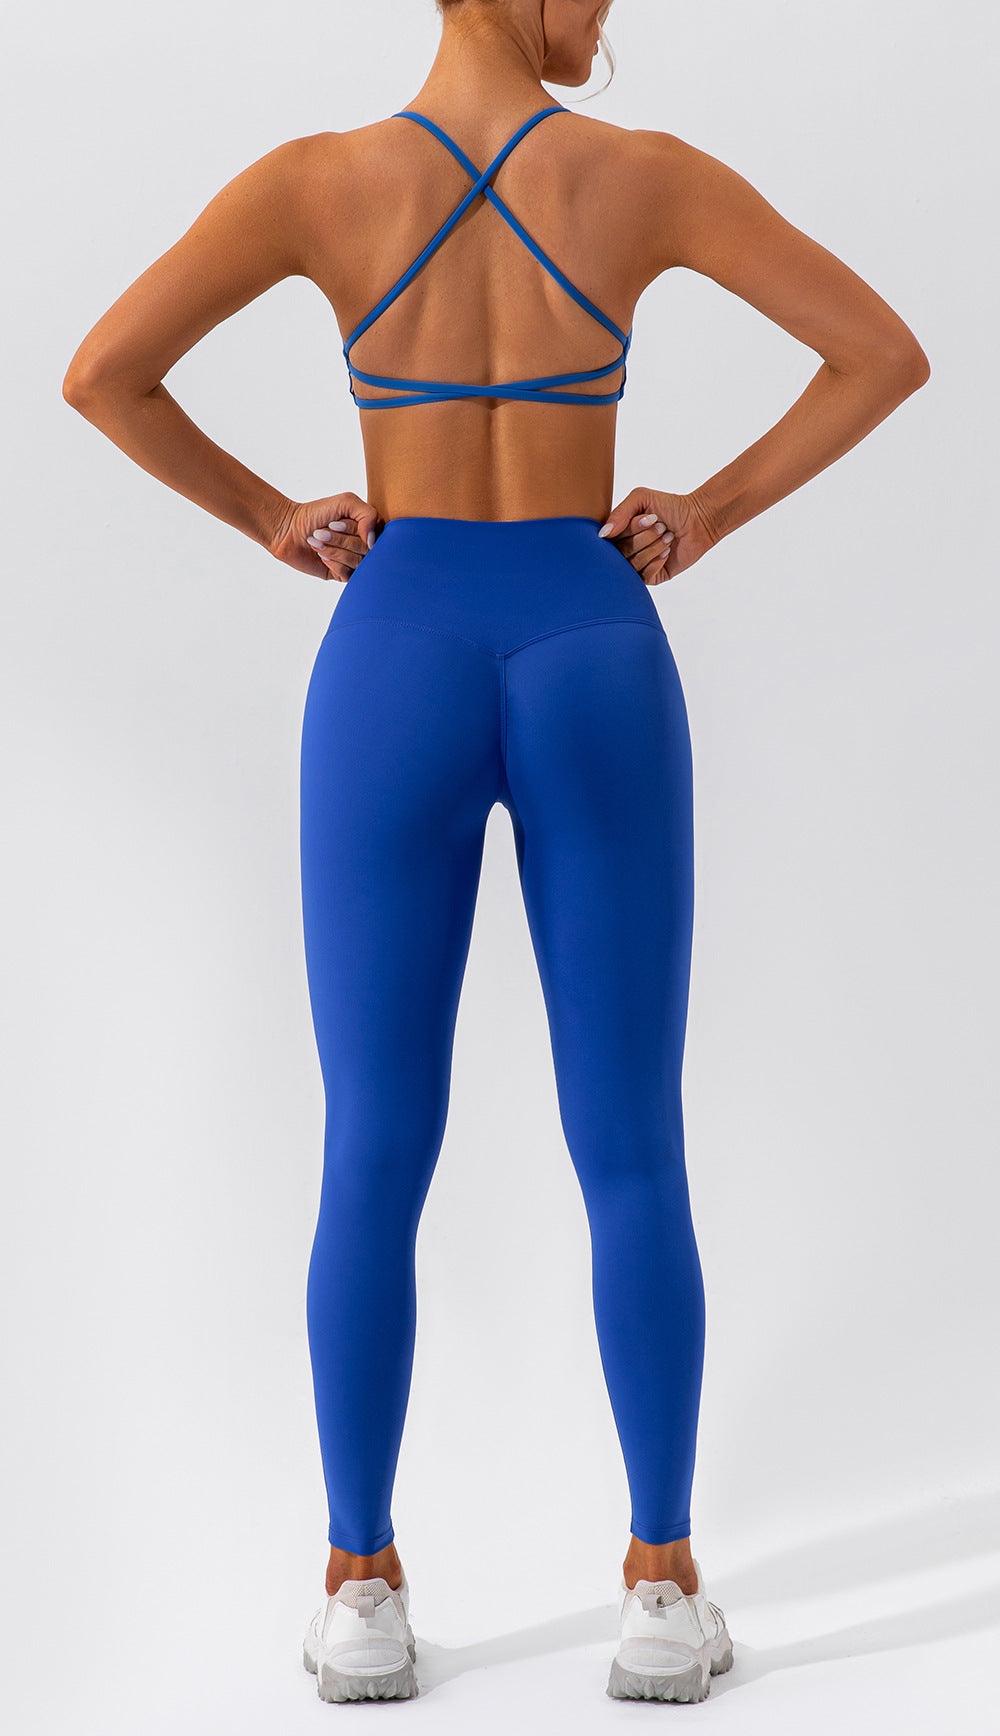 Sports suit sports bra and leggings fitness leisure running quick-drying yoga suit